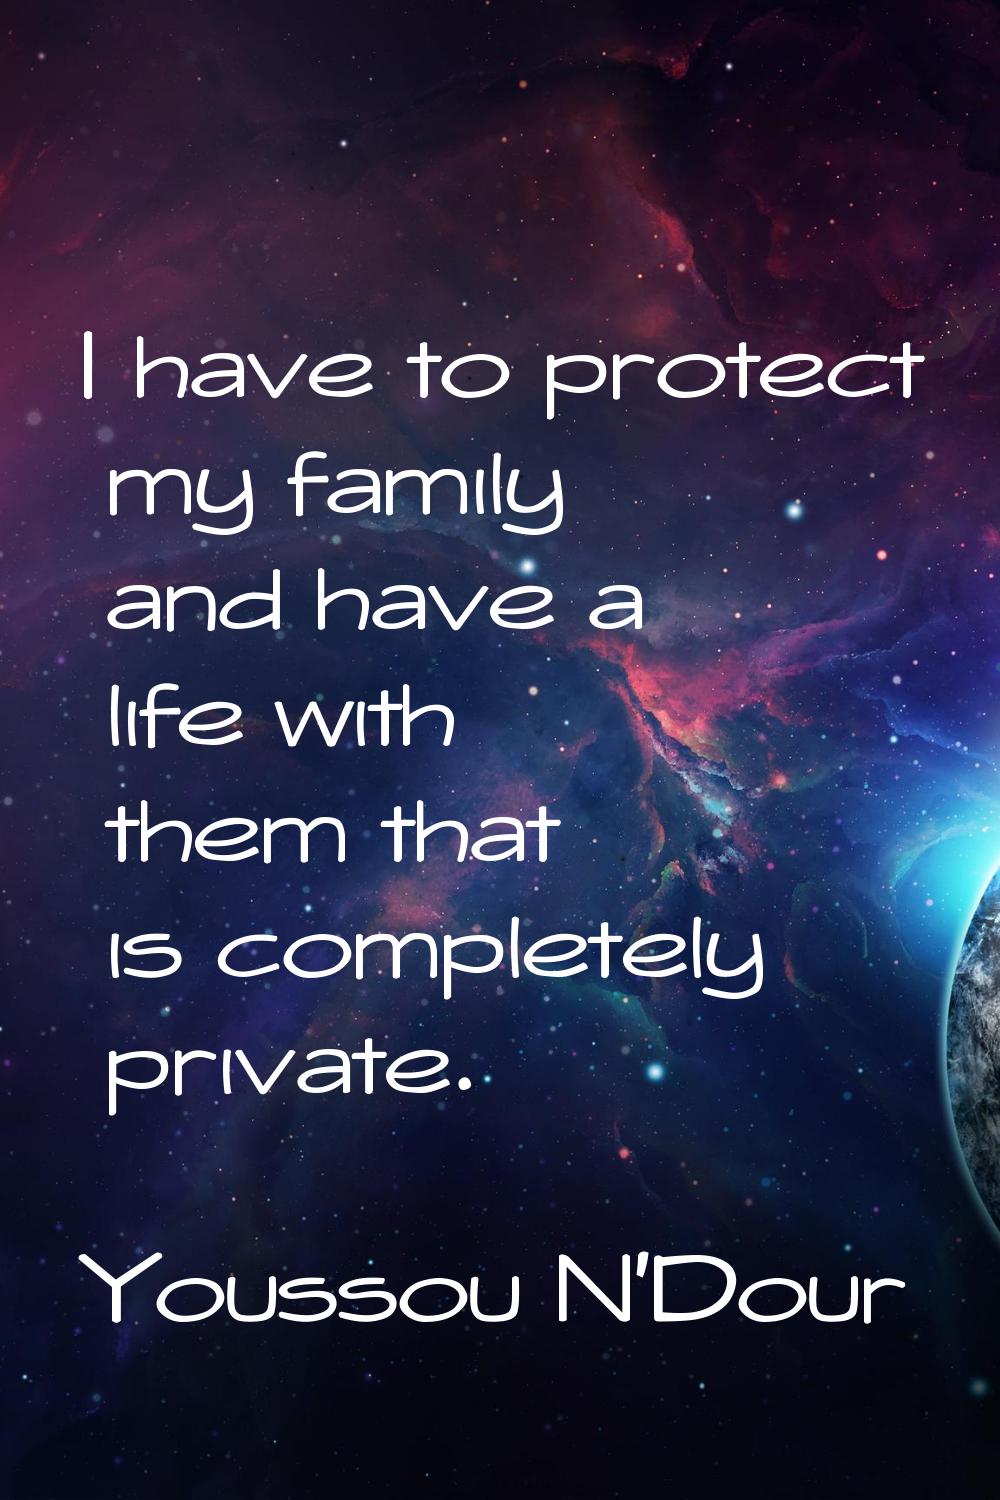 I have to protect my family and have a life with them that is completely private.